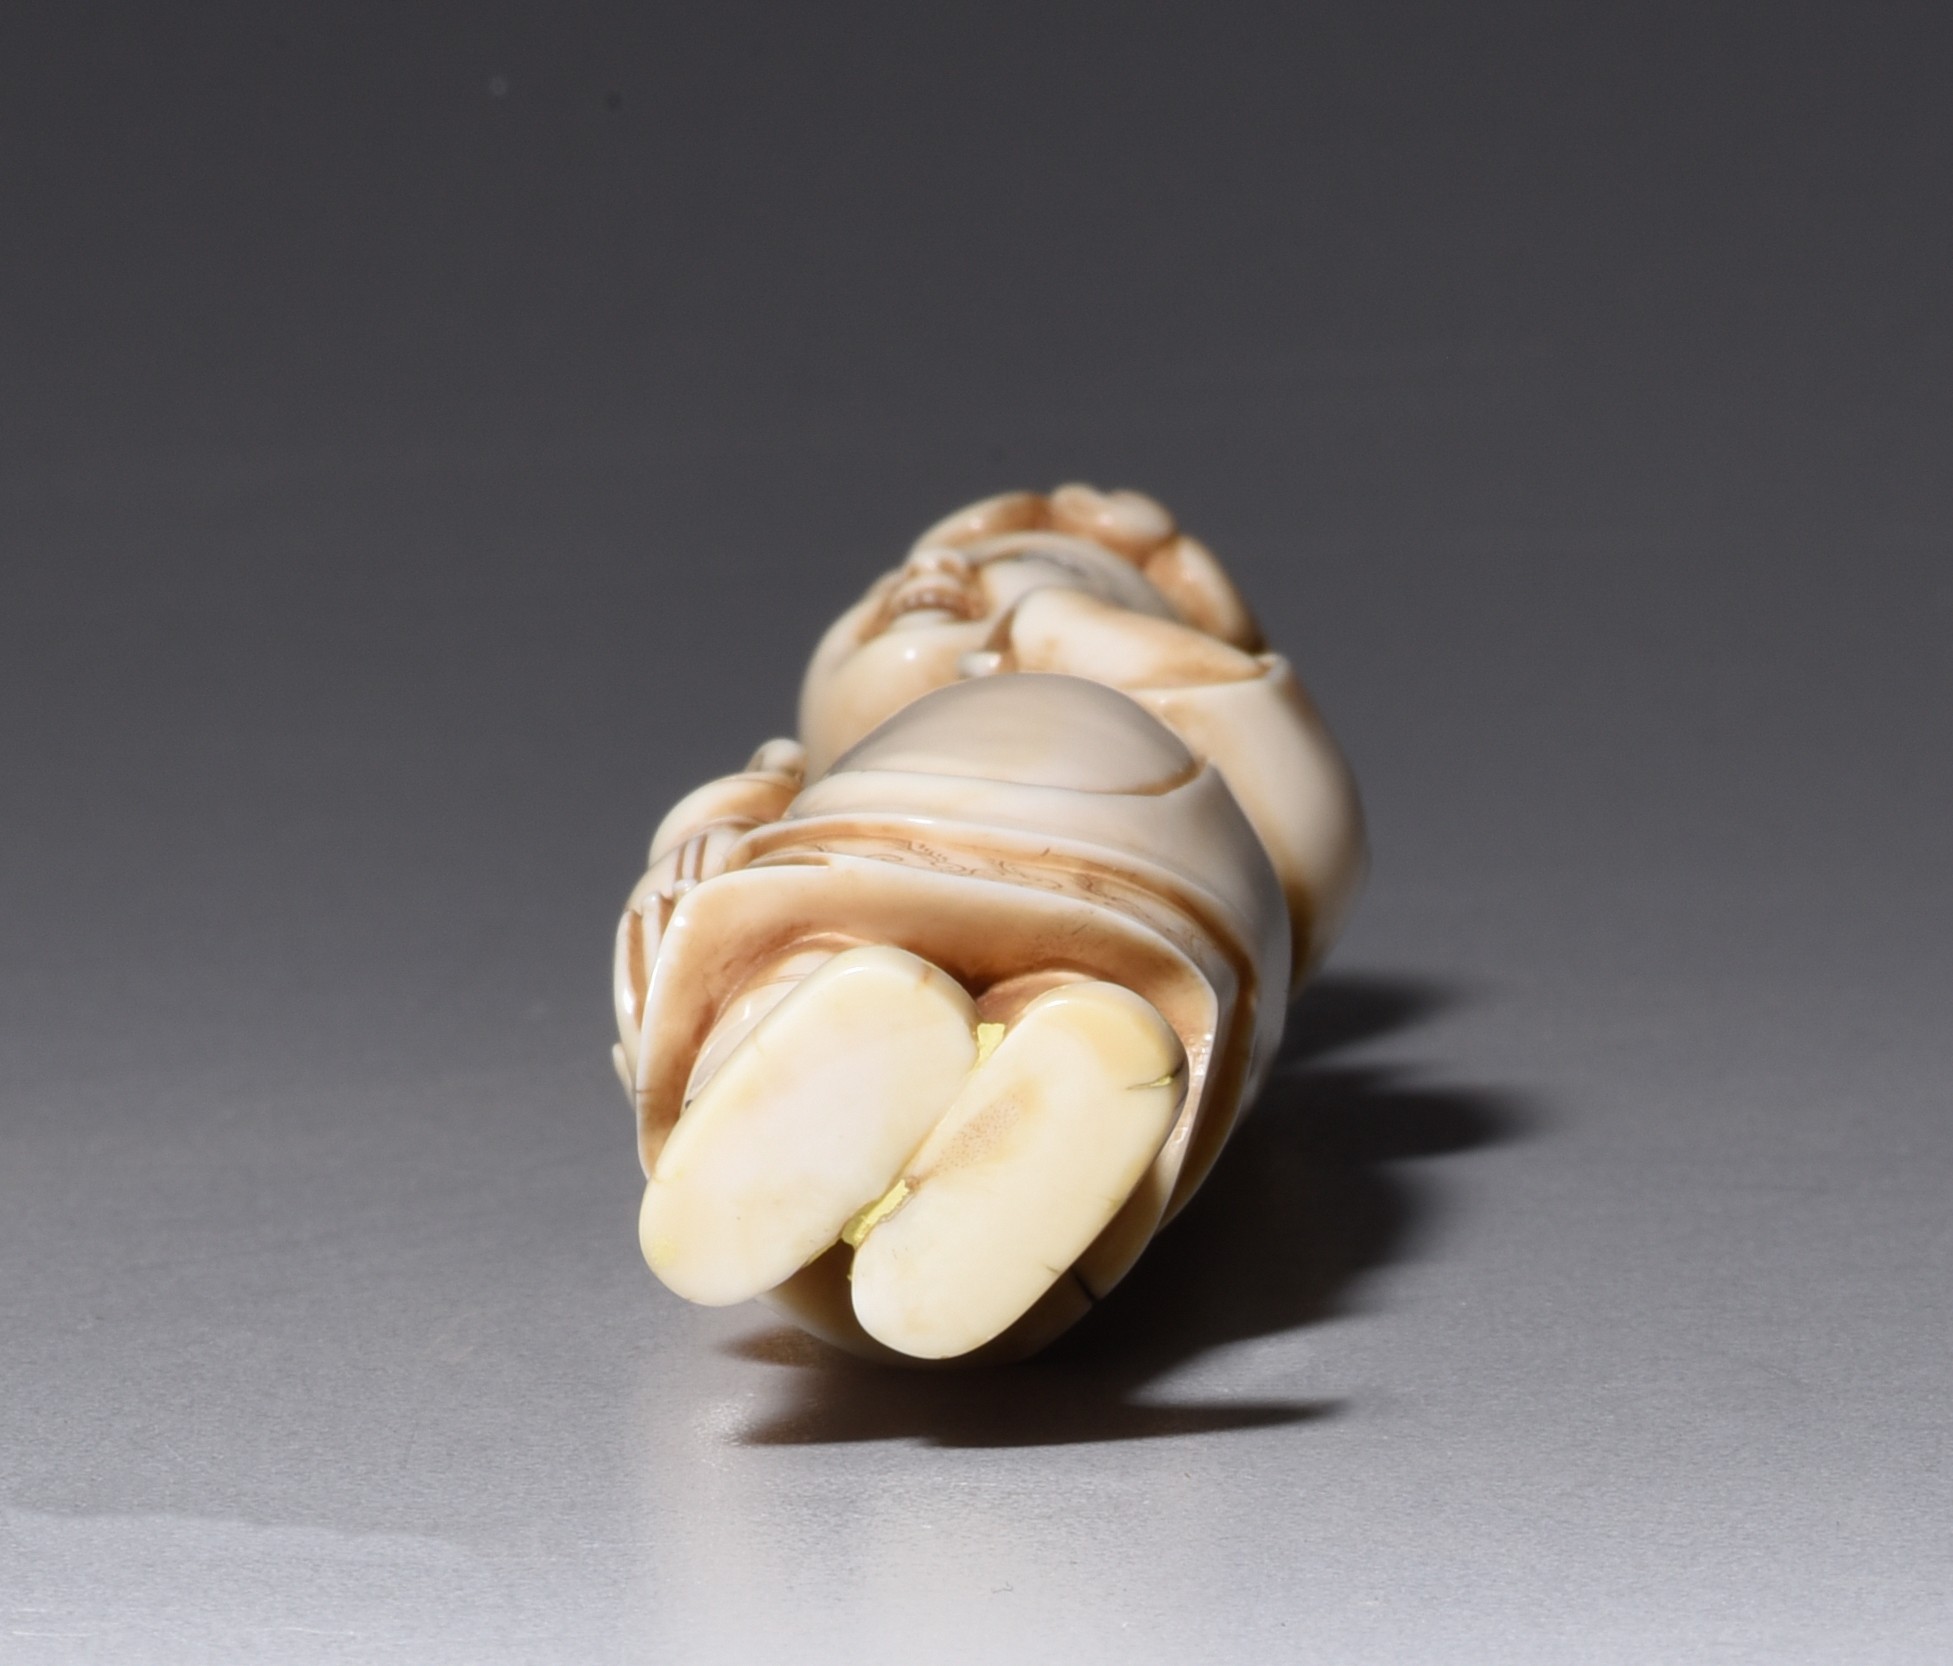 A Chinese ivory figure sculpted in Ming style, 19th century, H 14,2 cm, 79 g (+) - Image 5 of 6